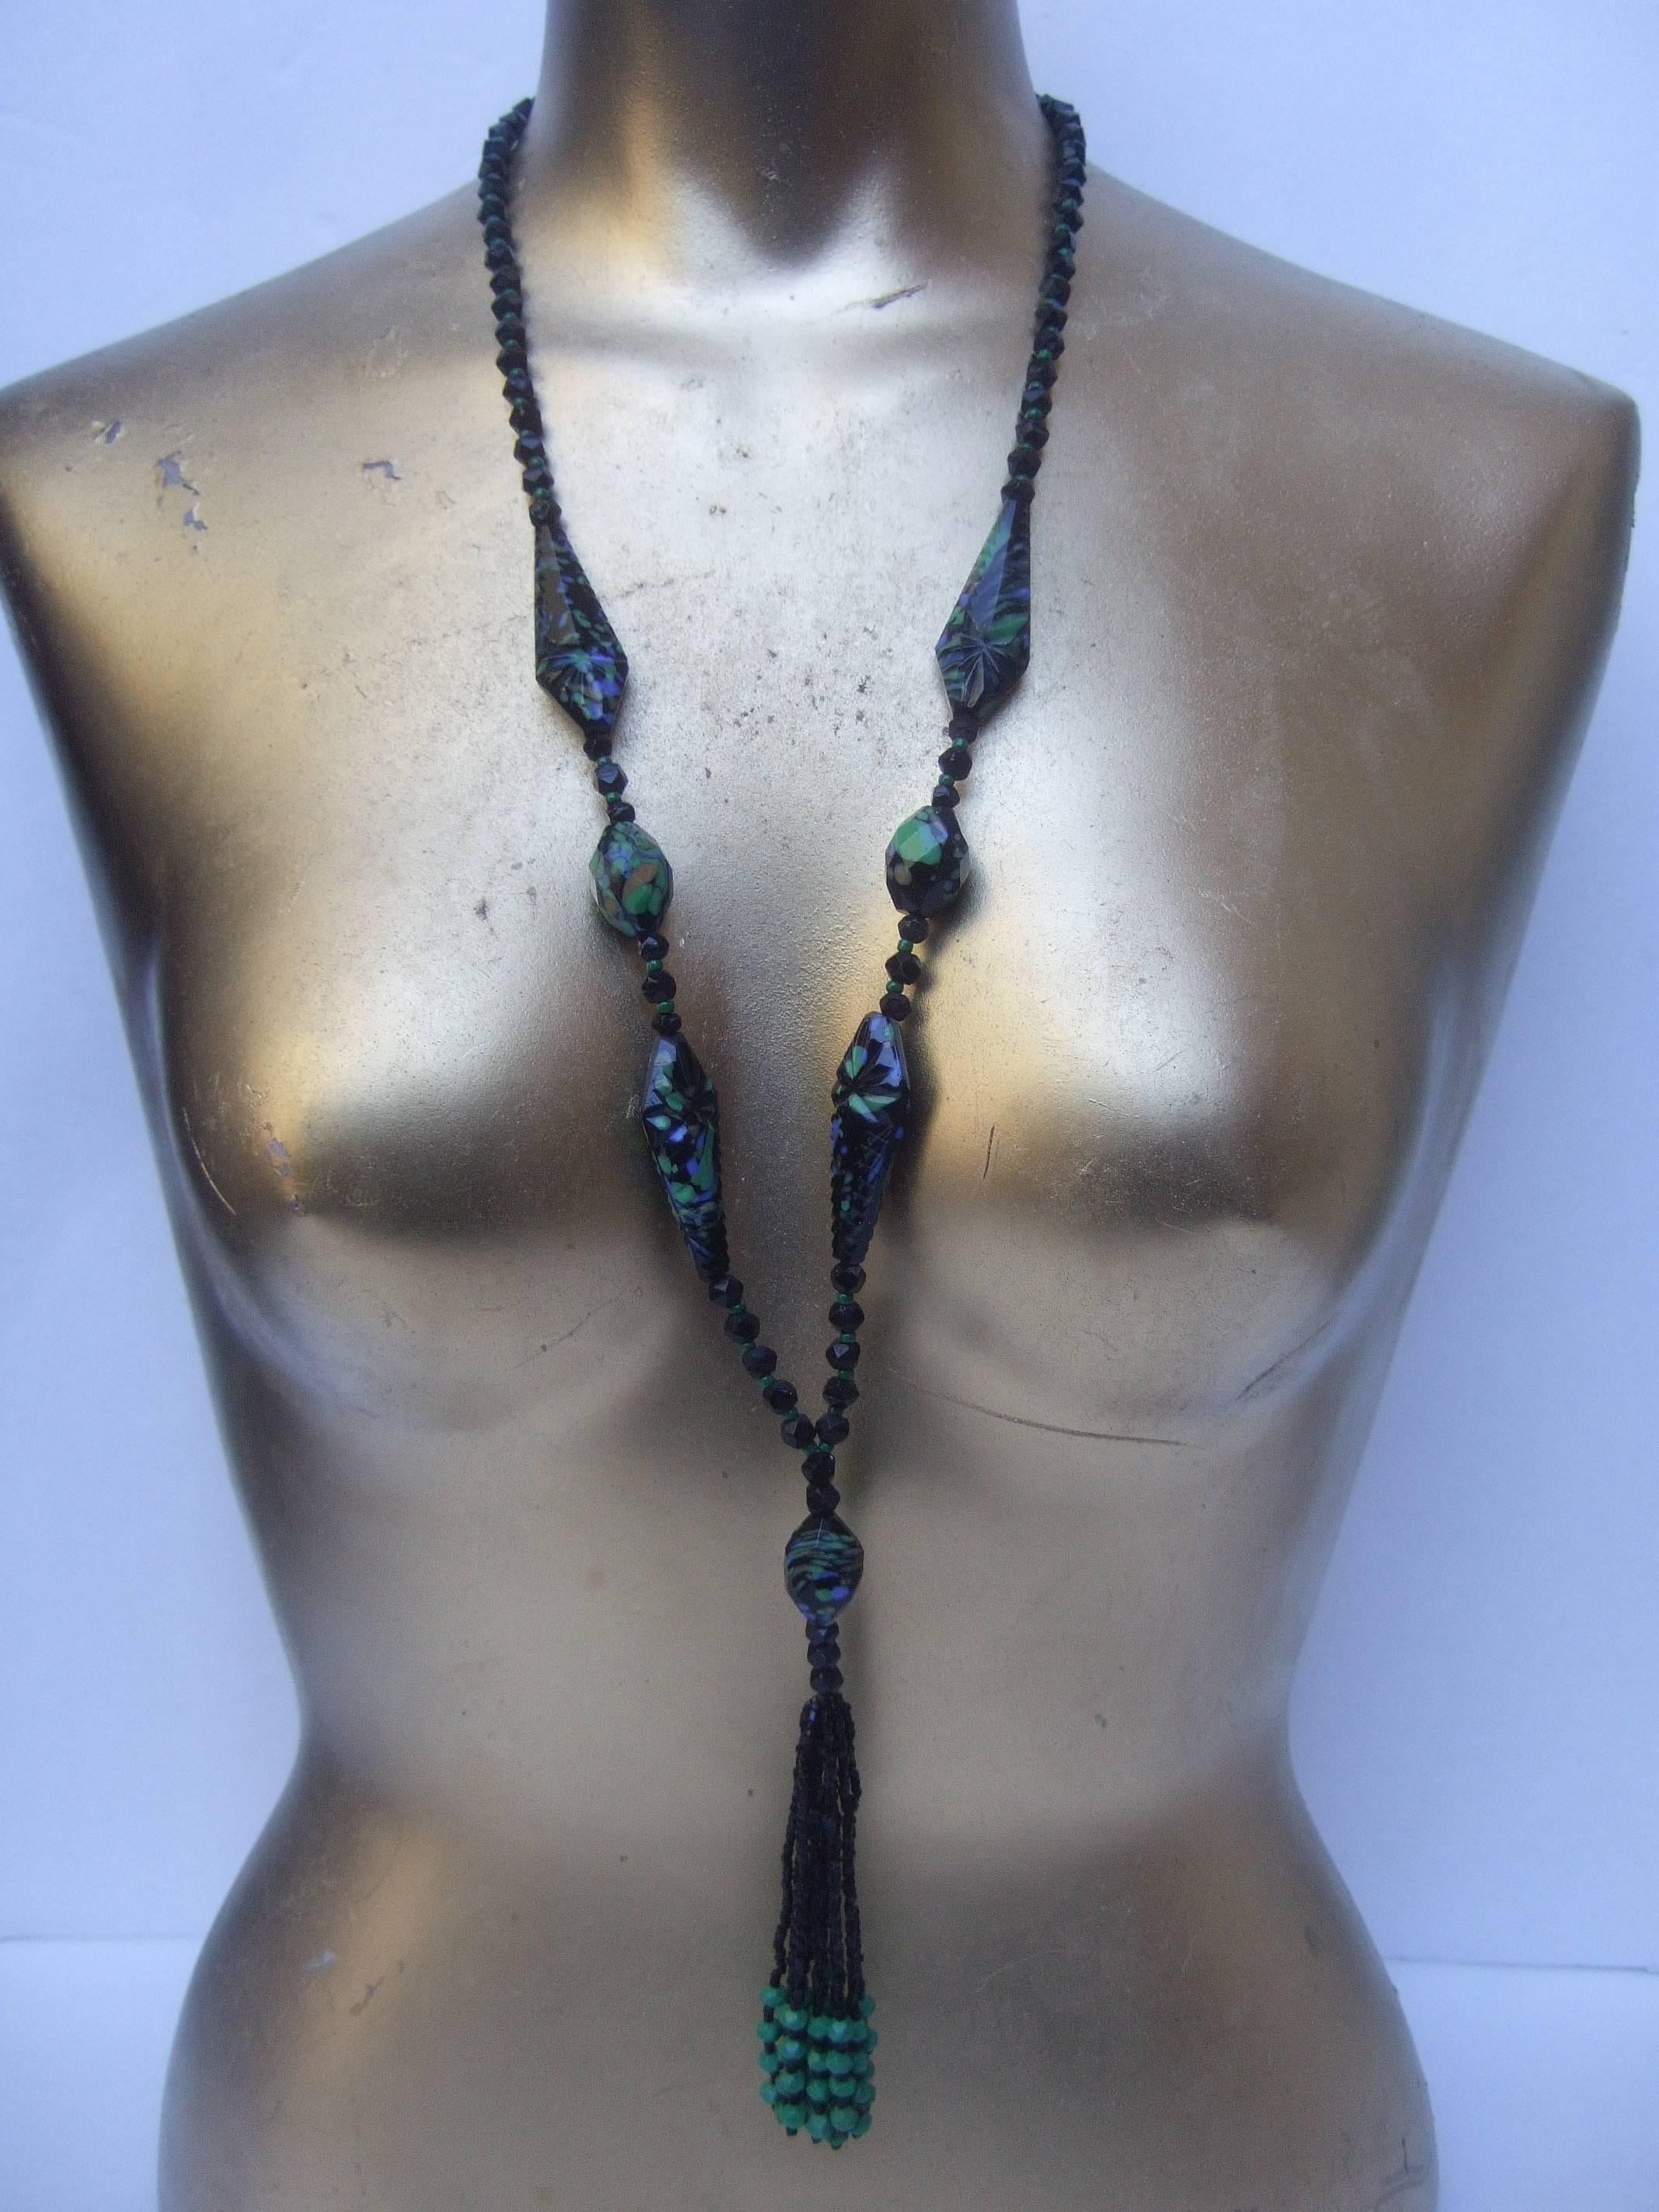 Art Deco Glass beaded sautoir necklace c 1930s
The elegant tassel necklace is designed 
with jet glass beads in various sizes and
shapes; juxtaposed with muted pale green
beads

Some of the larger elongated glass beads
are faceted black glass